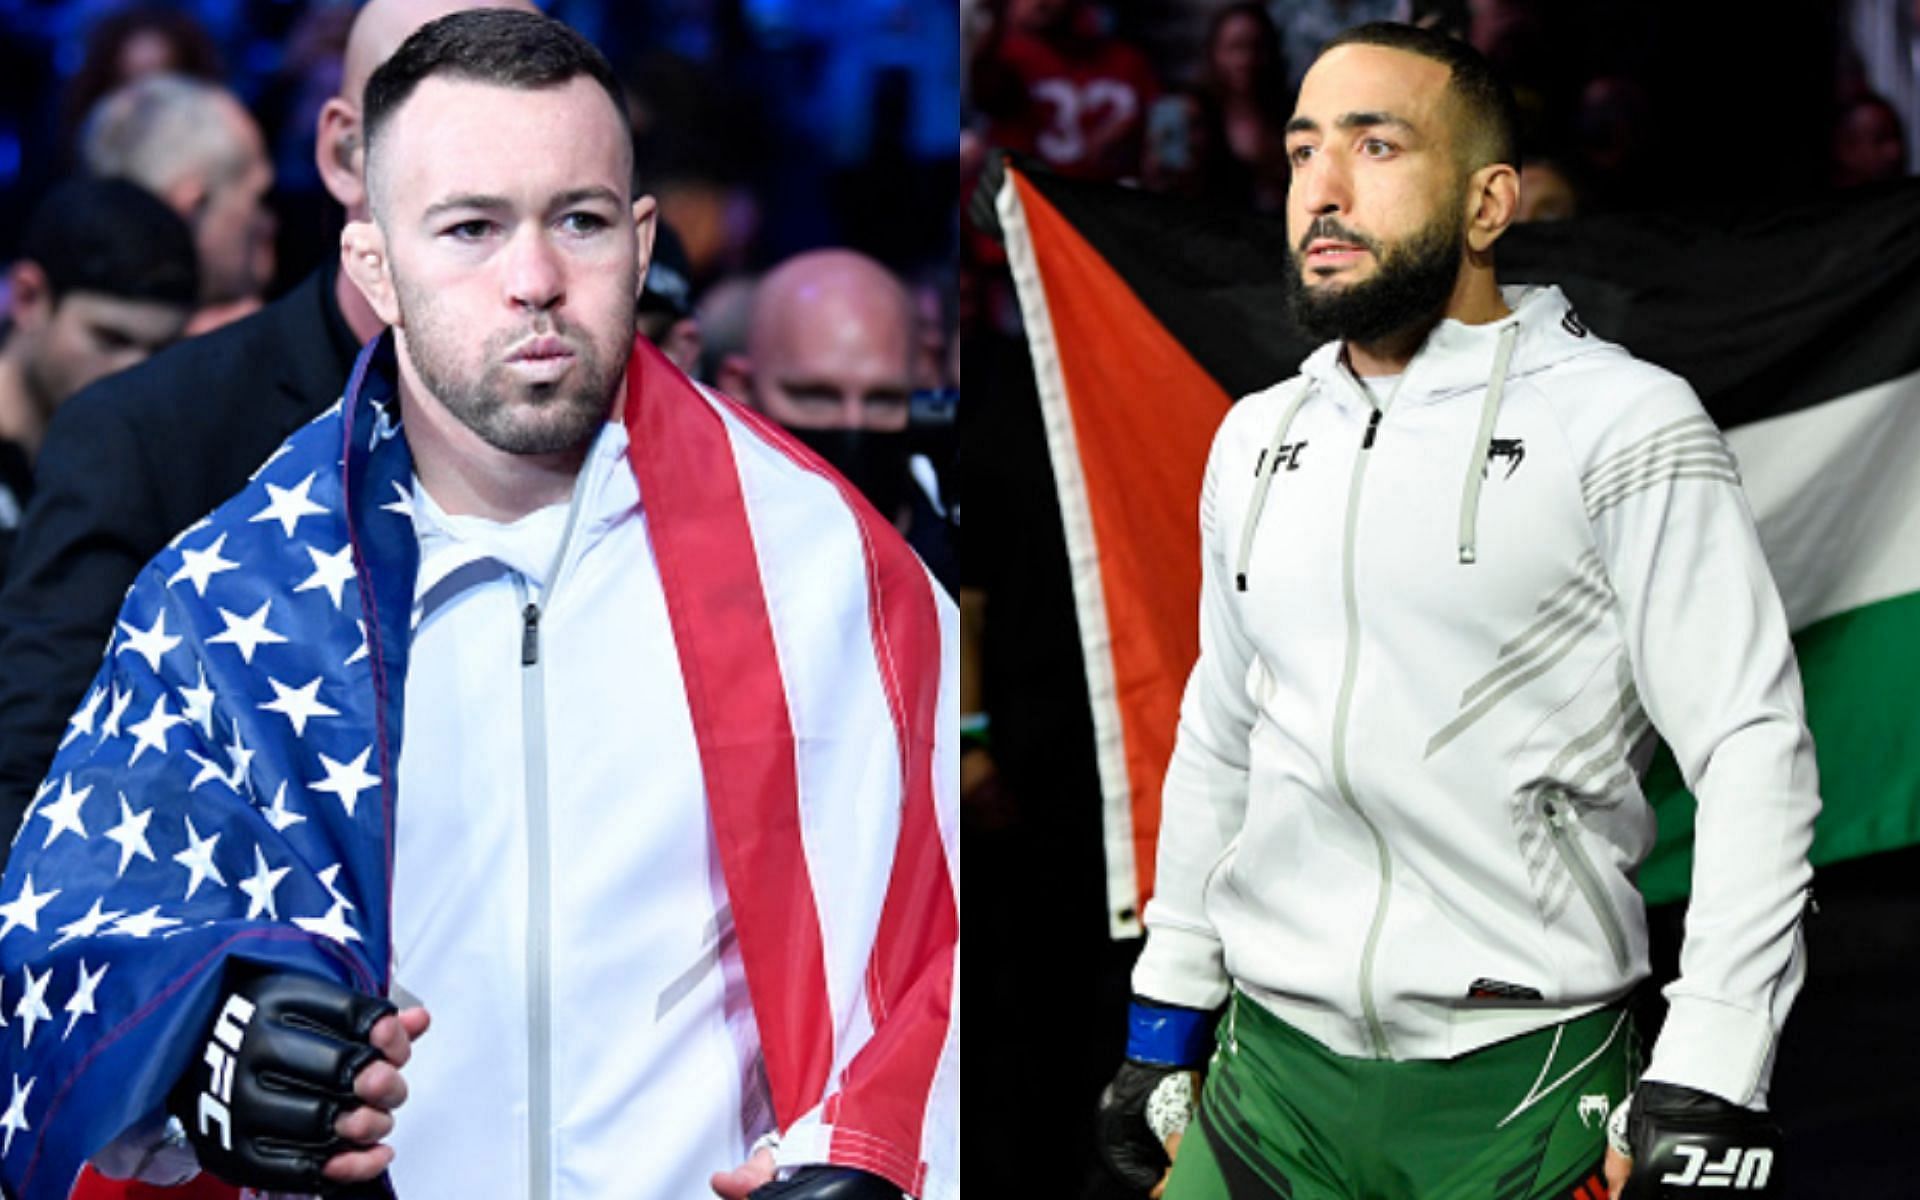 Belal Muhammad has taken a shot at Colby Covington (L)